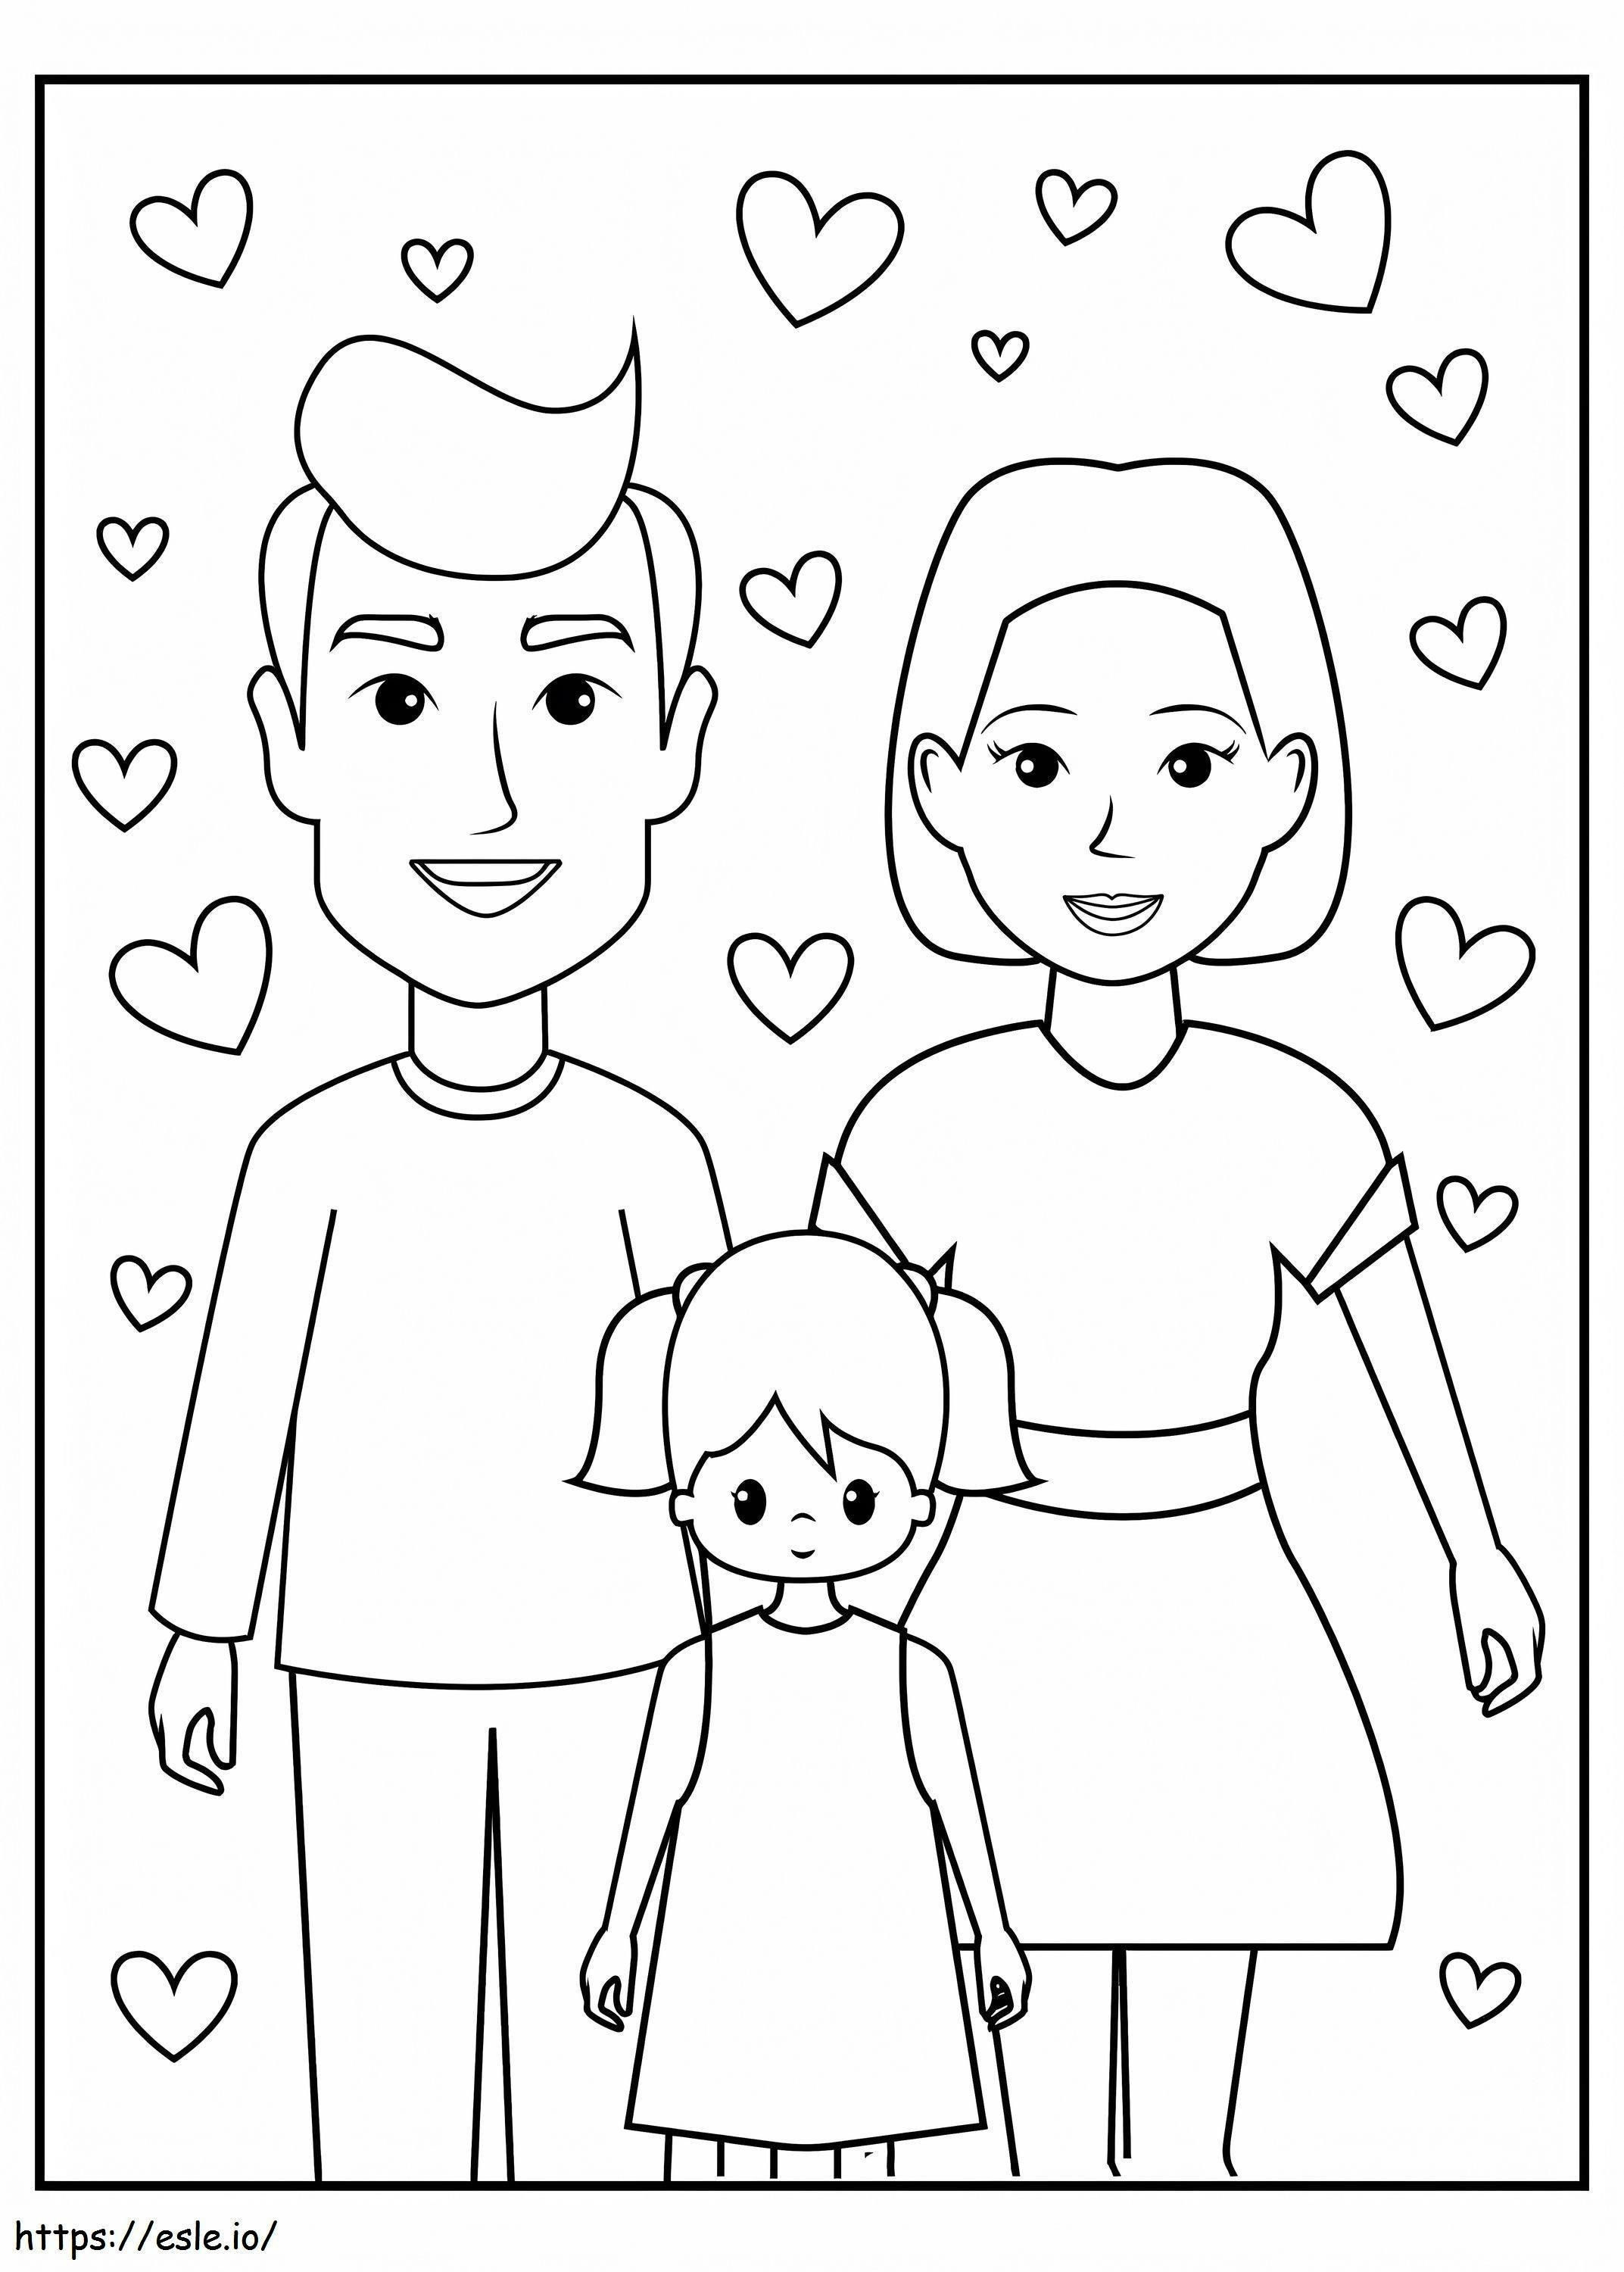 Family In Love coloring page